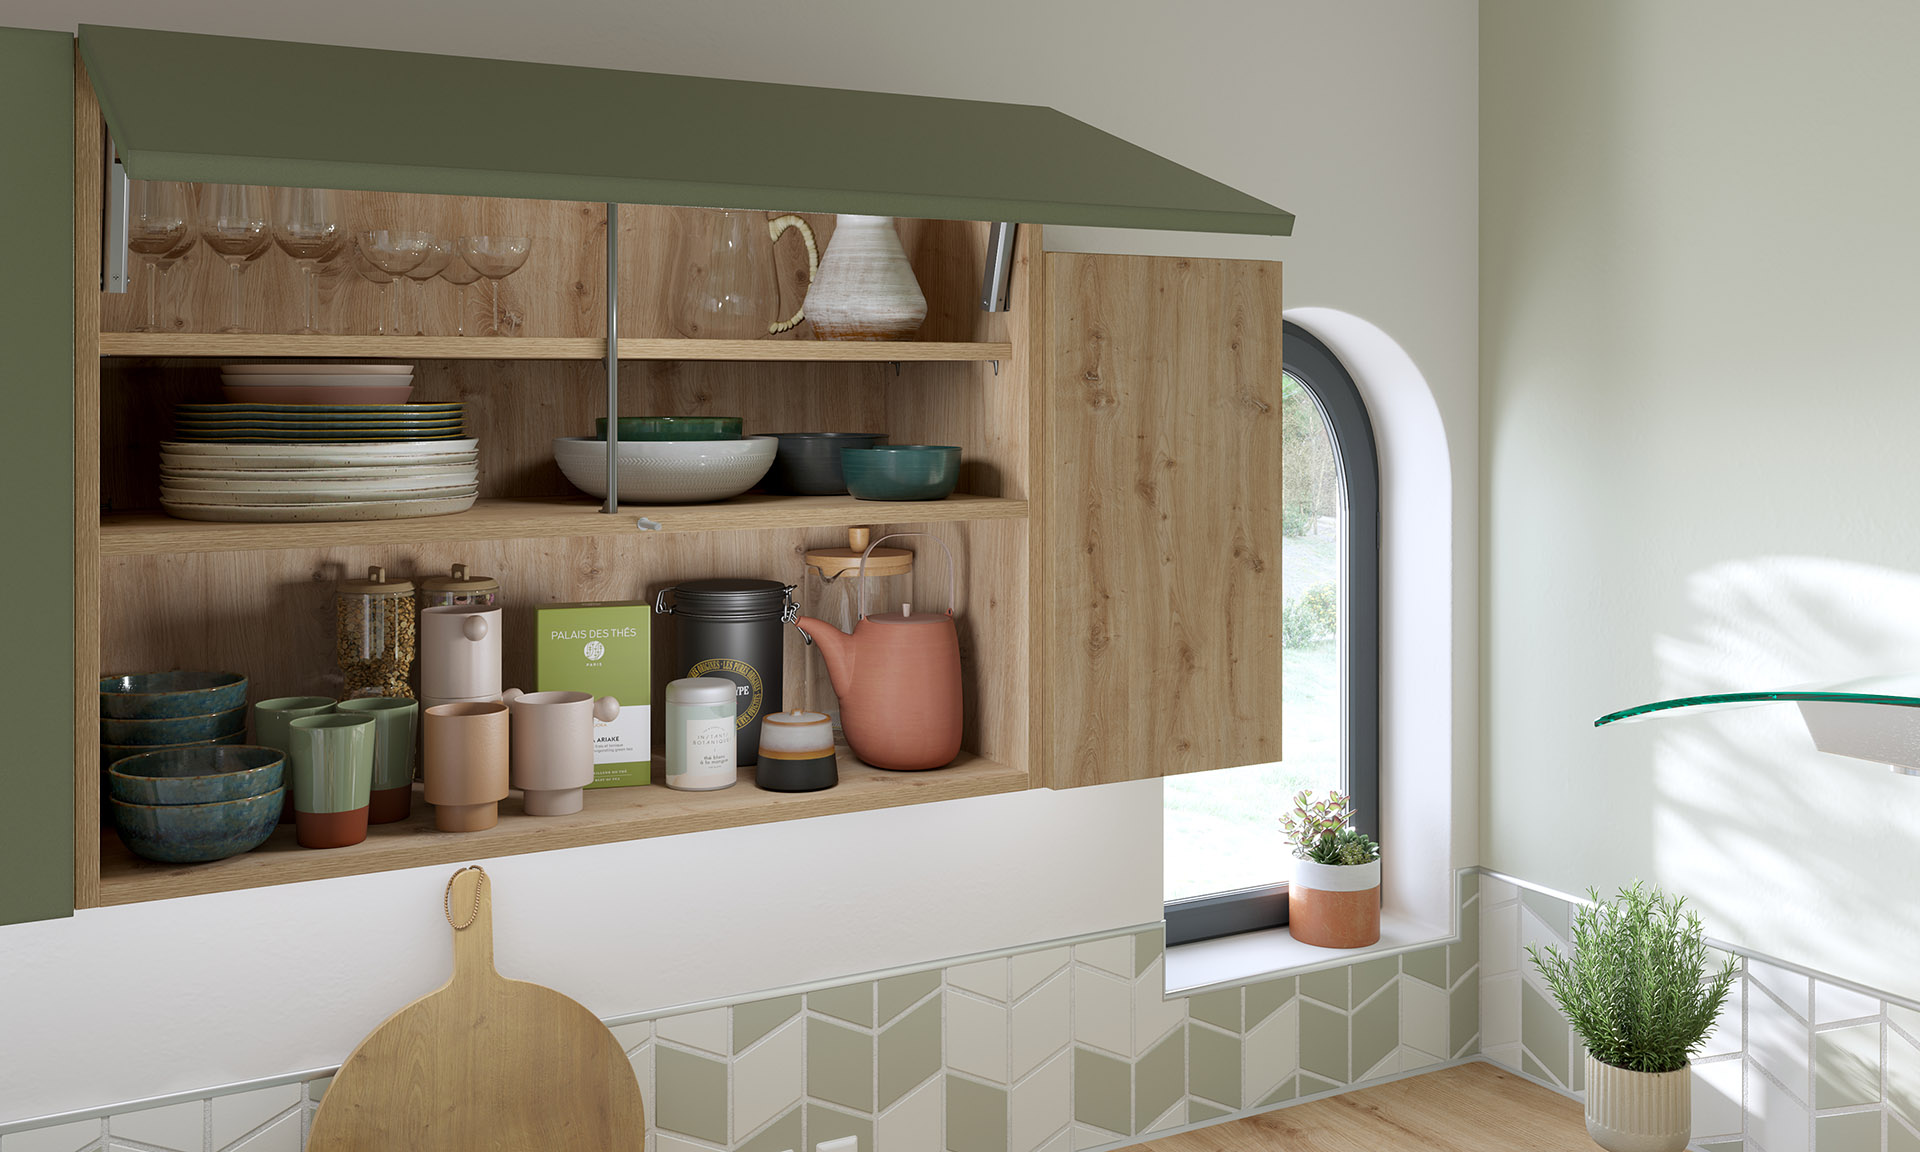 3D image of a cupboard and its dishes in a green and wood kitchen